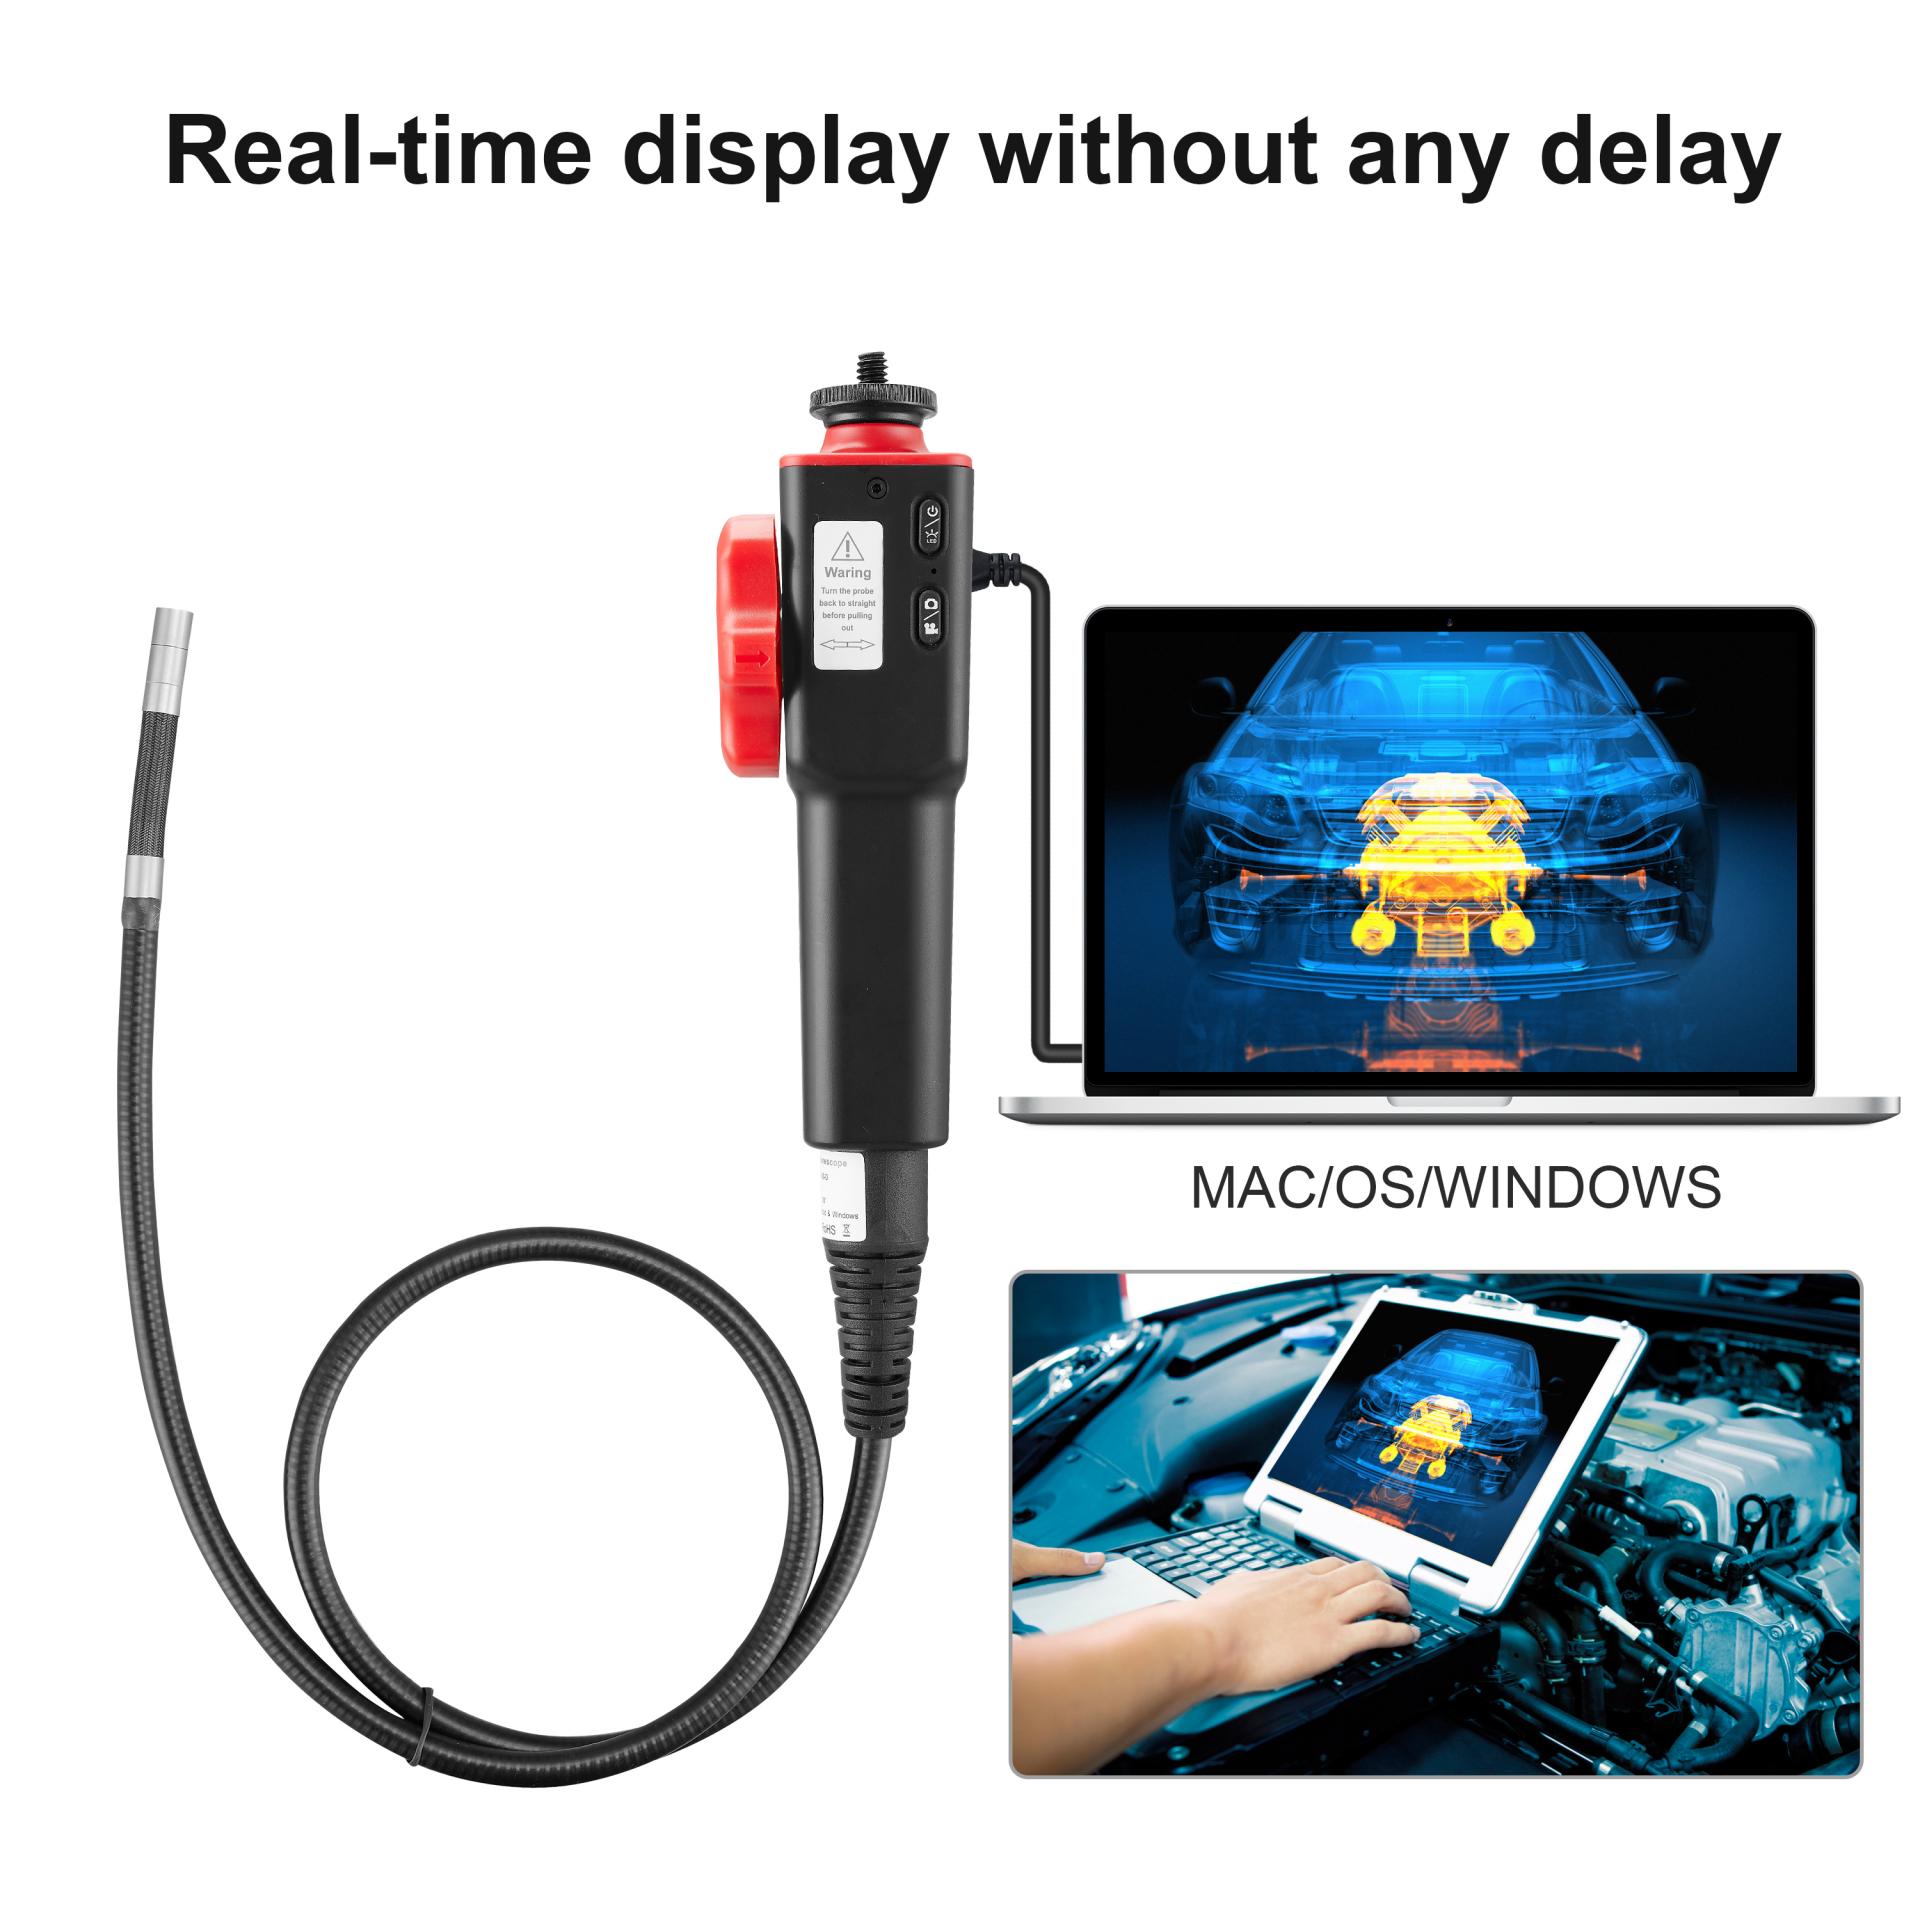 Portable 8.5 MM Borescope with Articulating Head Support OTG Bore Camera HD 2MP Articulating Borescope Factory